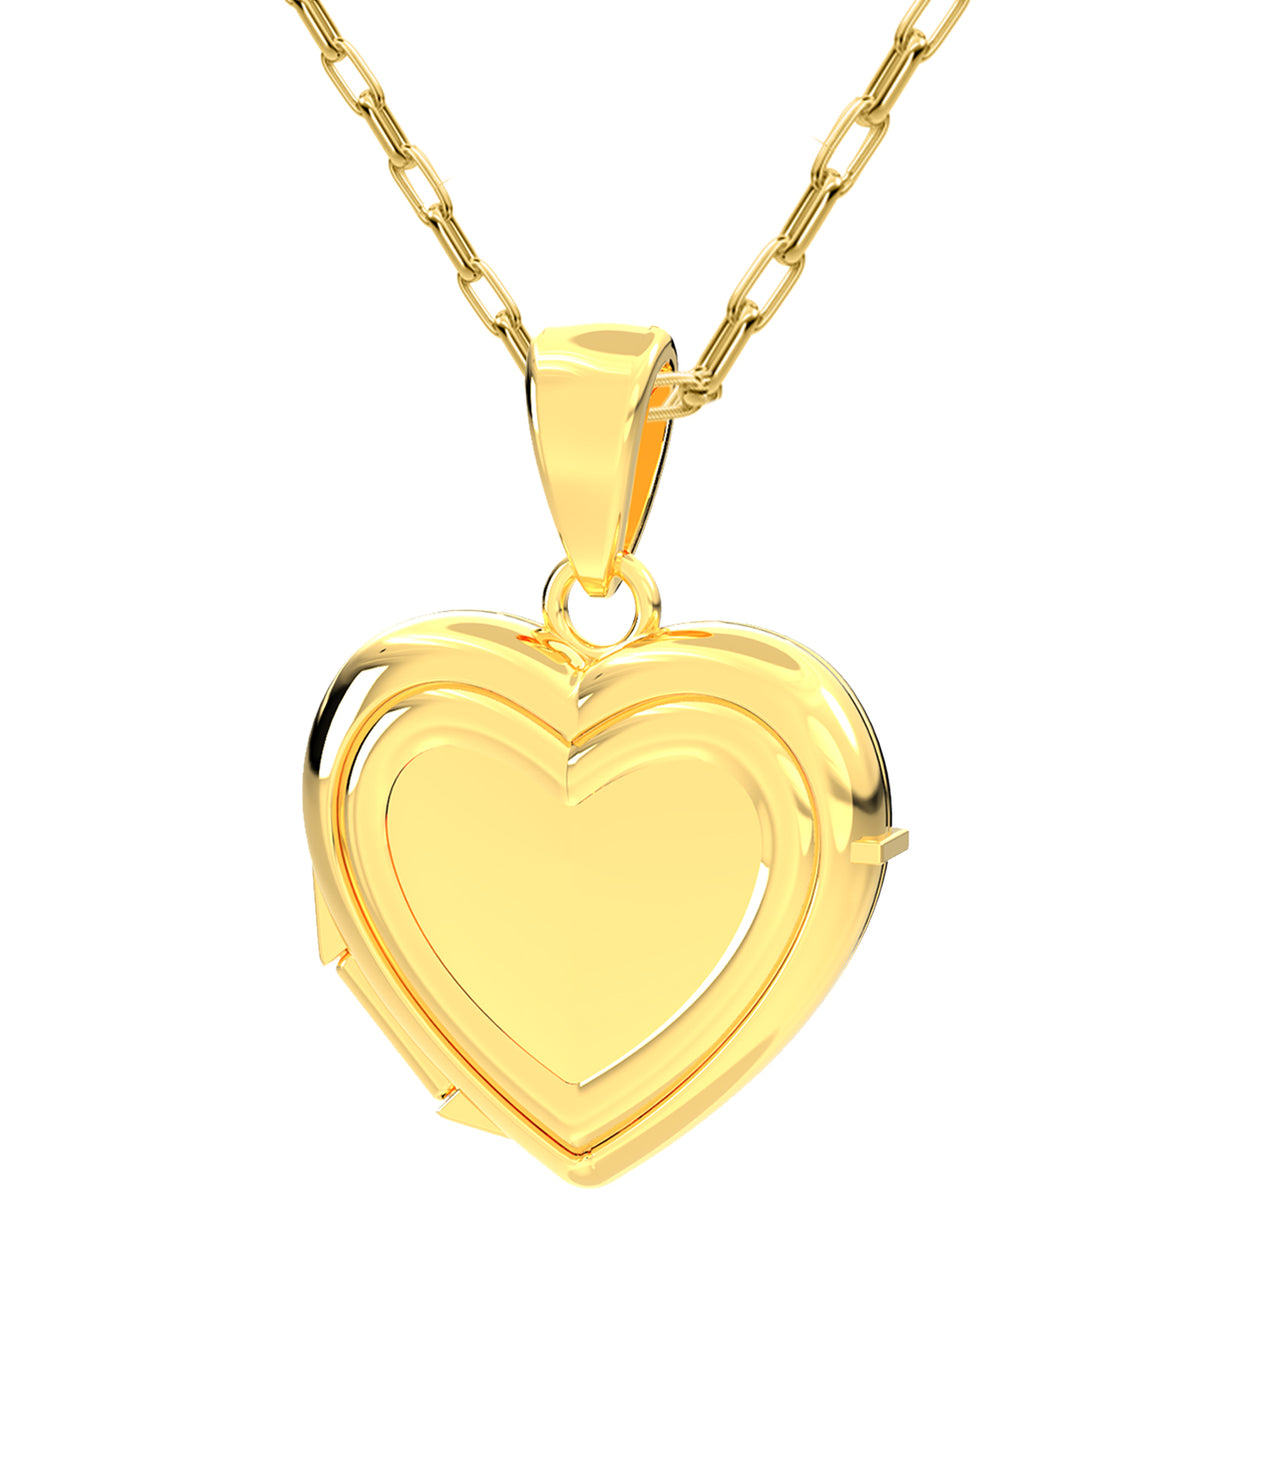 Engravable Personalized Ladies 14k Yellow Gold Polished Heart 2 Photo Locket Pendant Necklace, 17mm